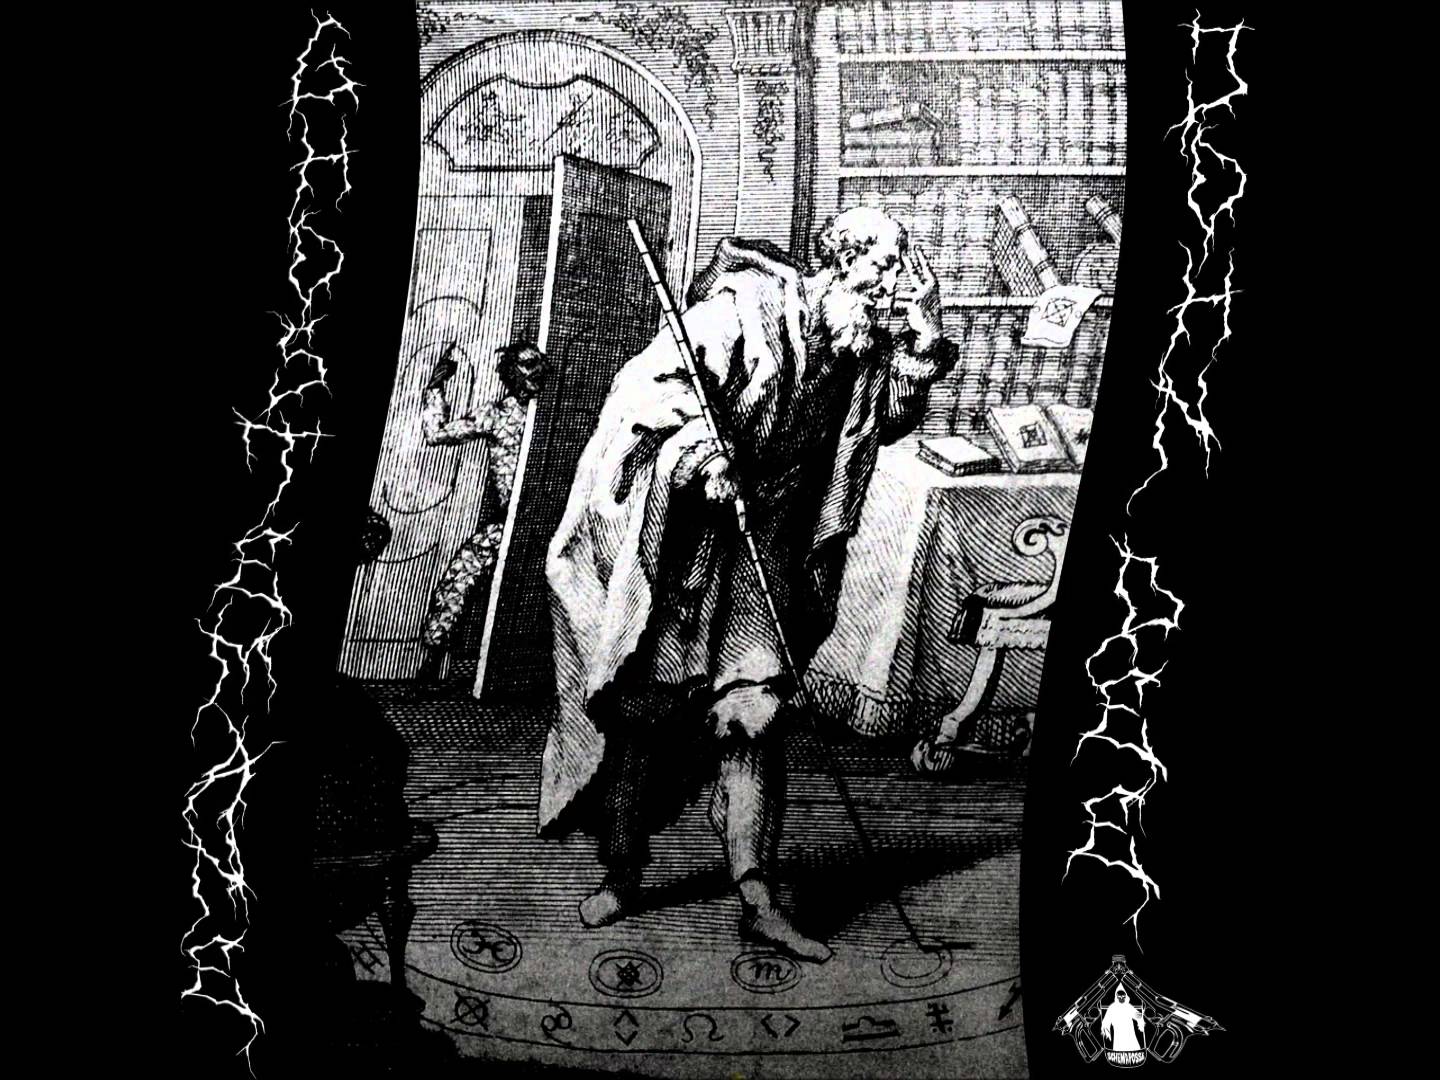 I made a variety of 9x16 mobile wallpapers using the new Mercury sigil from  the end of the Lazaretto video  rGHOSTEMANE